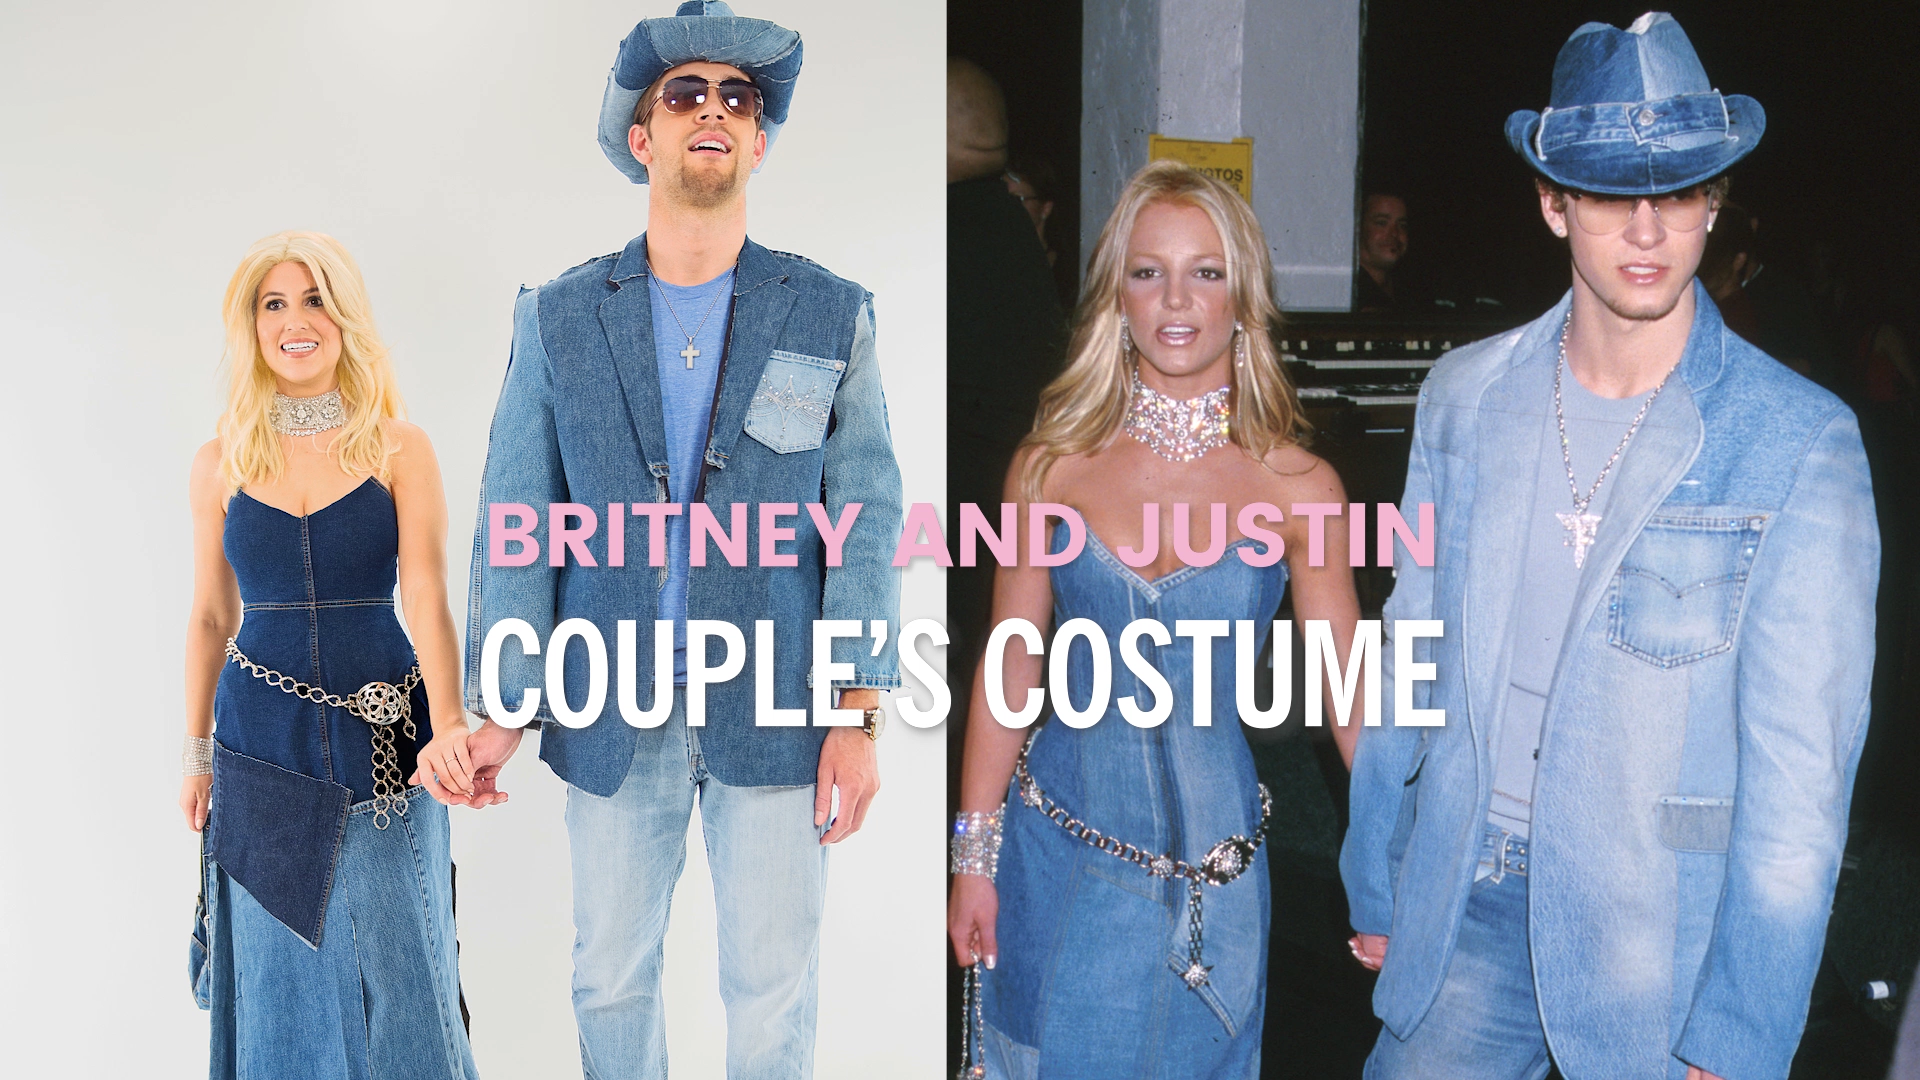 HuffPost Weird News - 15 years ago today... #fbf (cc: Britney Spears, Justin  Timberlake) | Facebook